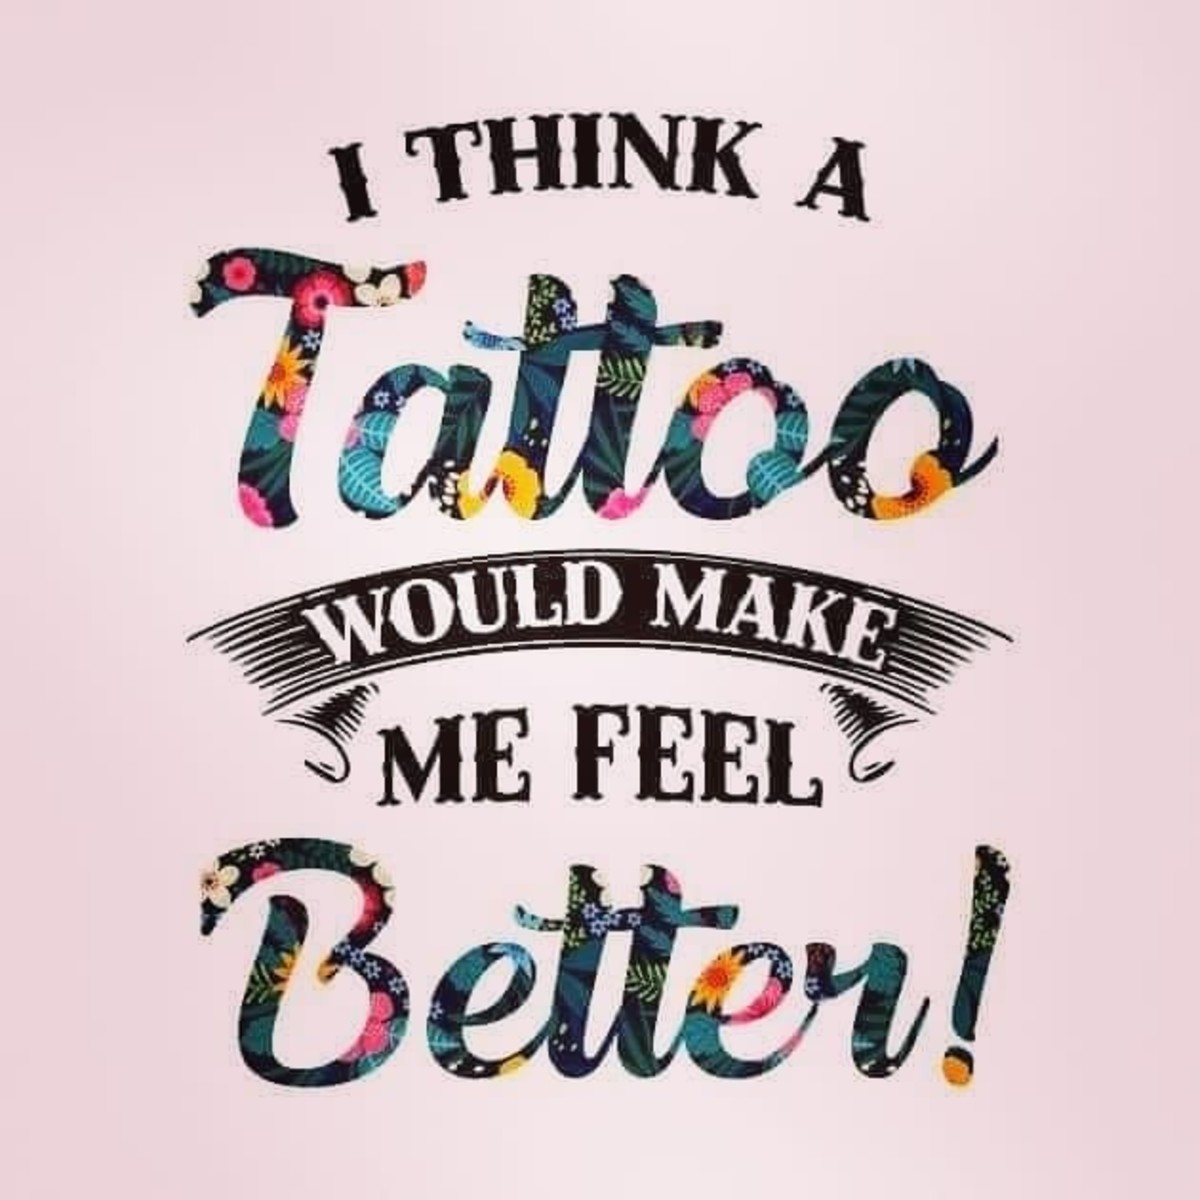 Why People Love Tattoos!